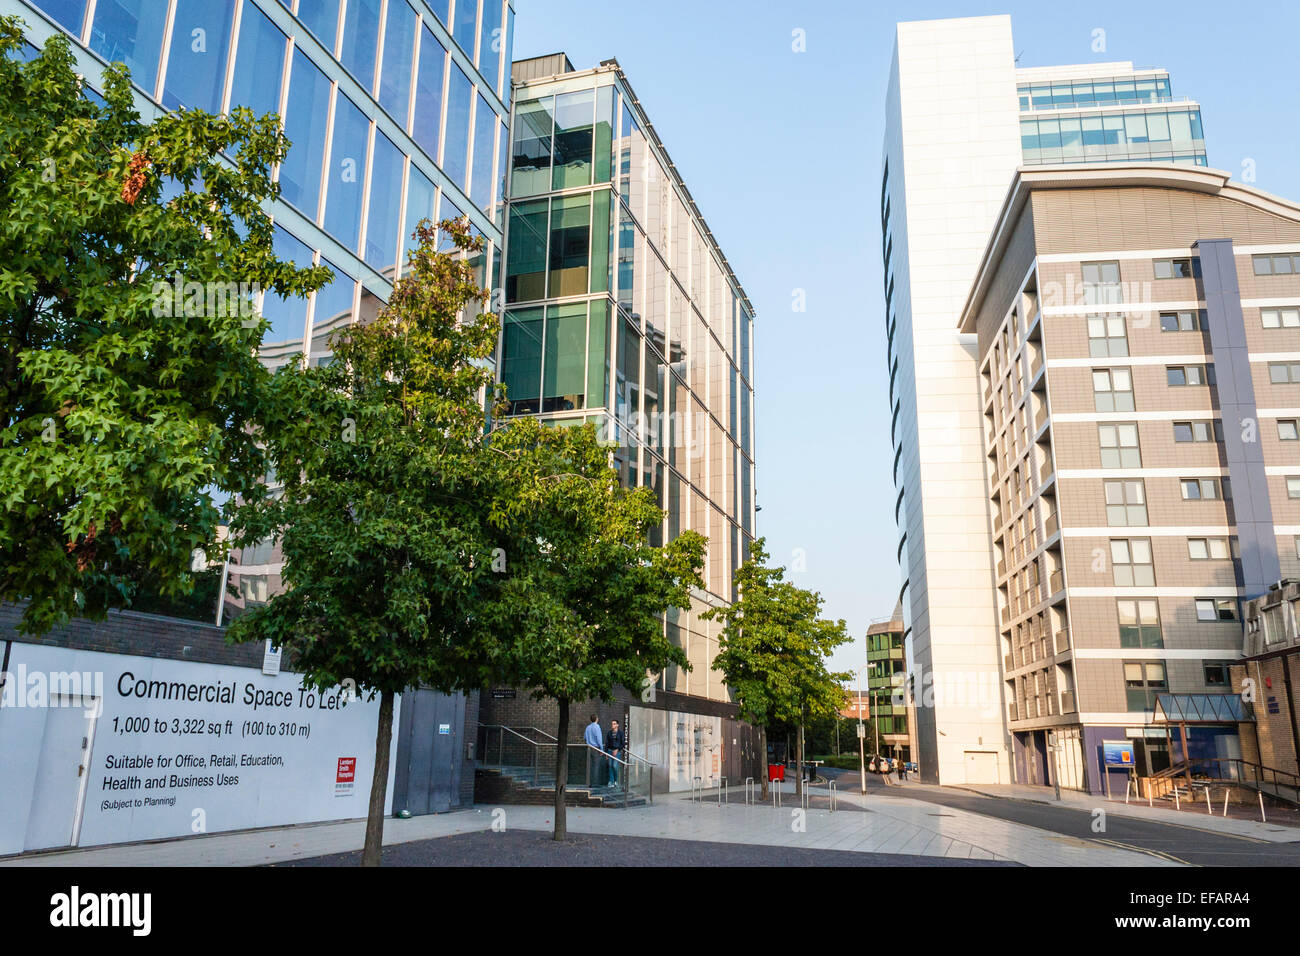 Town centre offices and apartments, Reading, Berkshire, England, GB, UK. Stock Photo